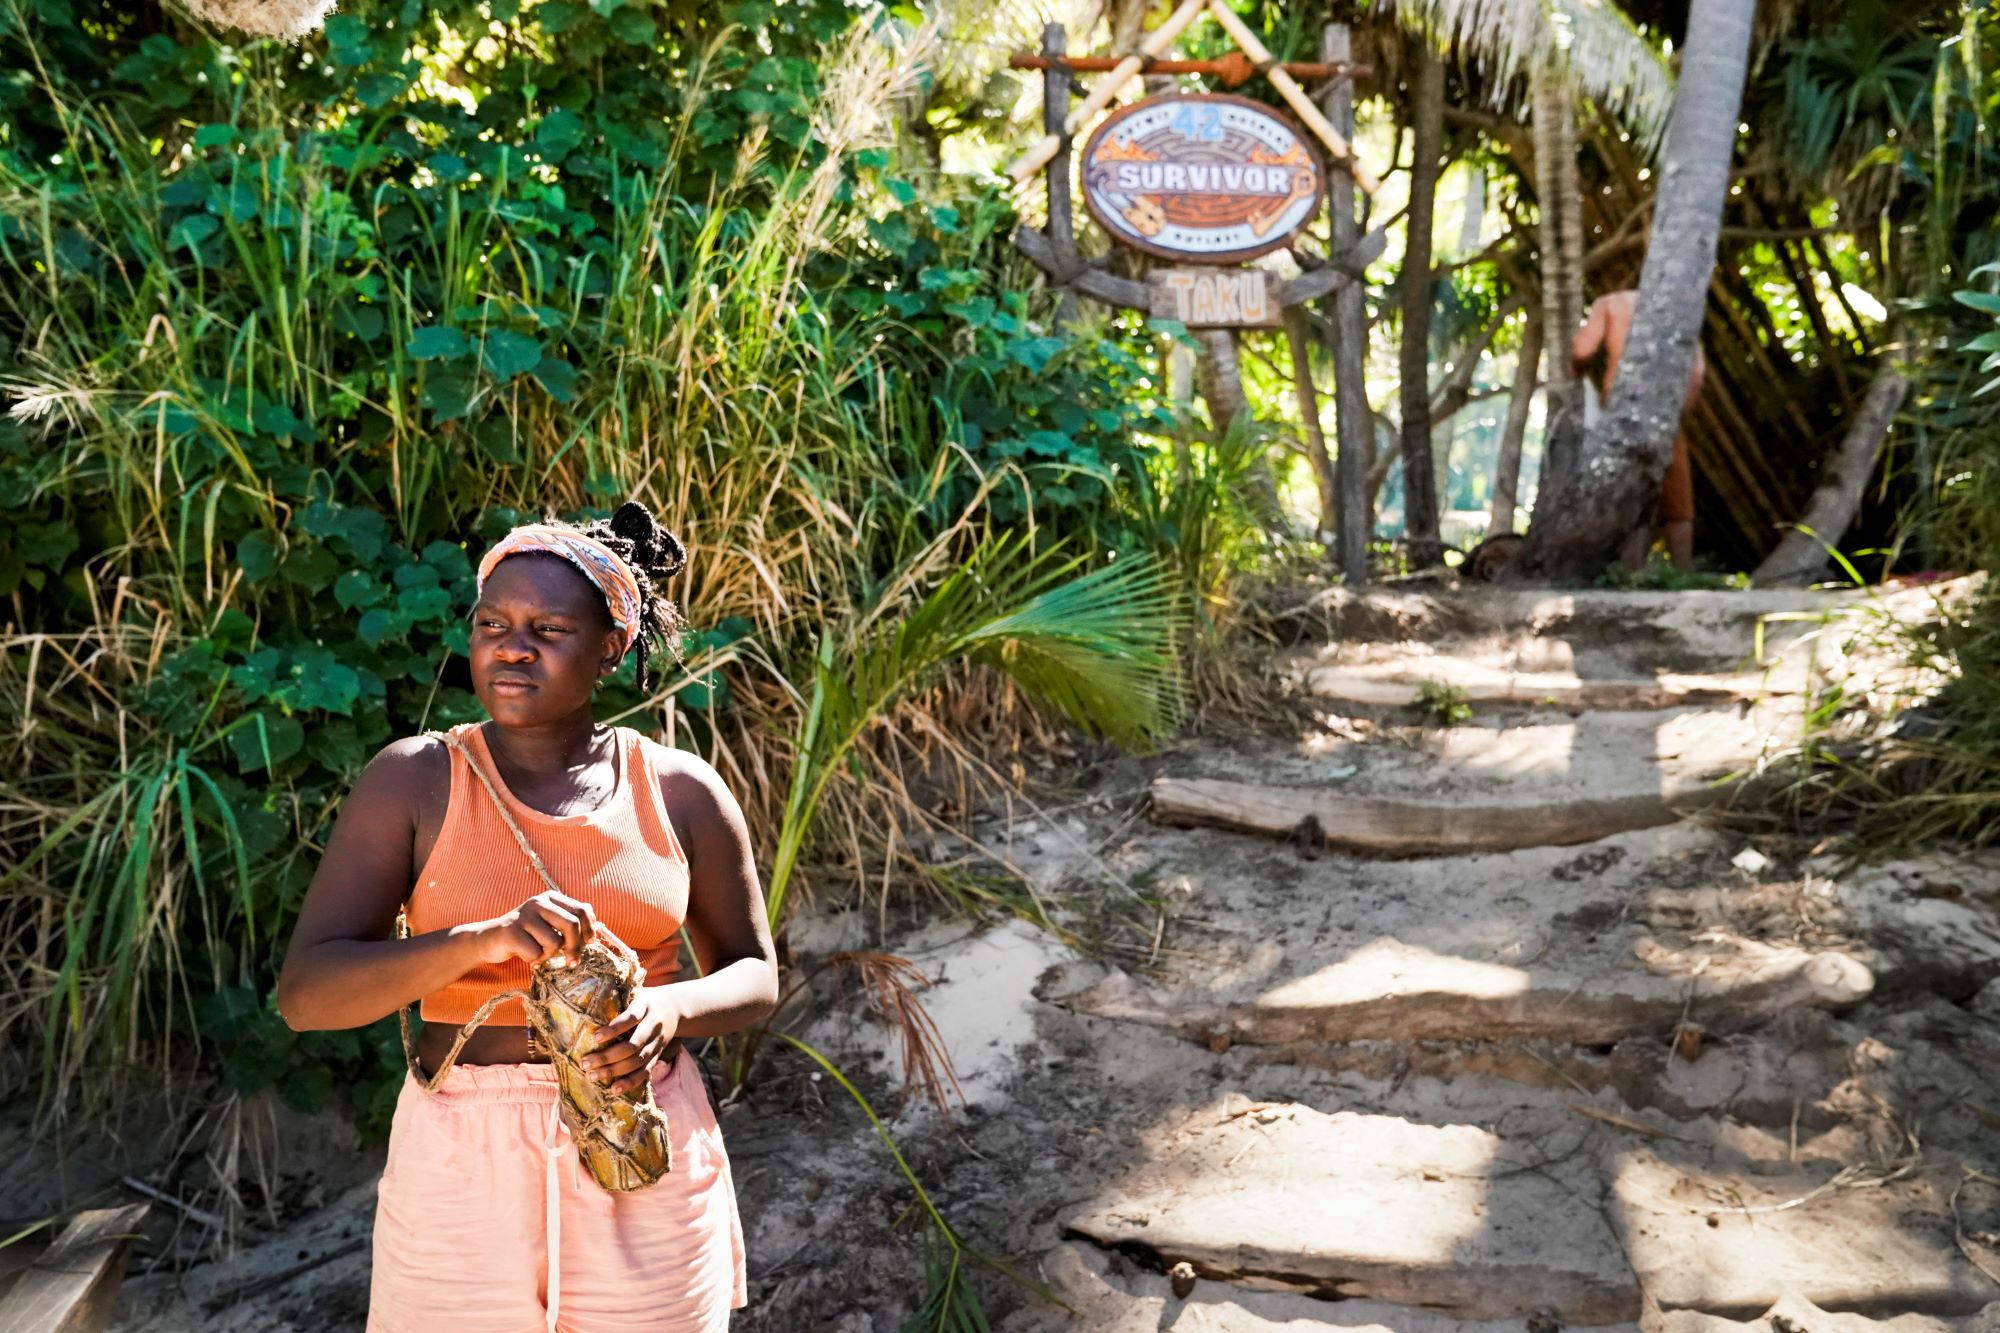 Maryanne Oketch, a castaway in 'Survivor' Season 42 who admitted to having a crush on Zach, wears an orange tank top, light pink shorts, and her orange buff wrapped around her head.